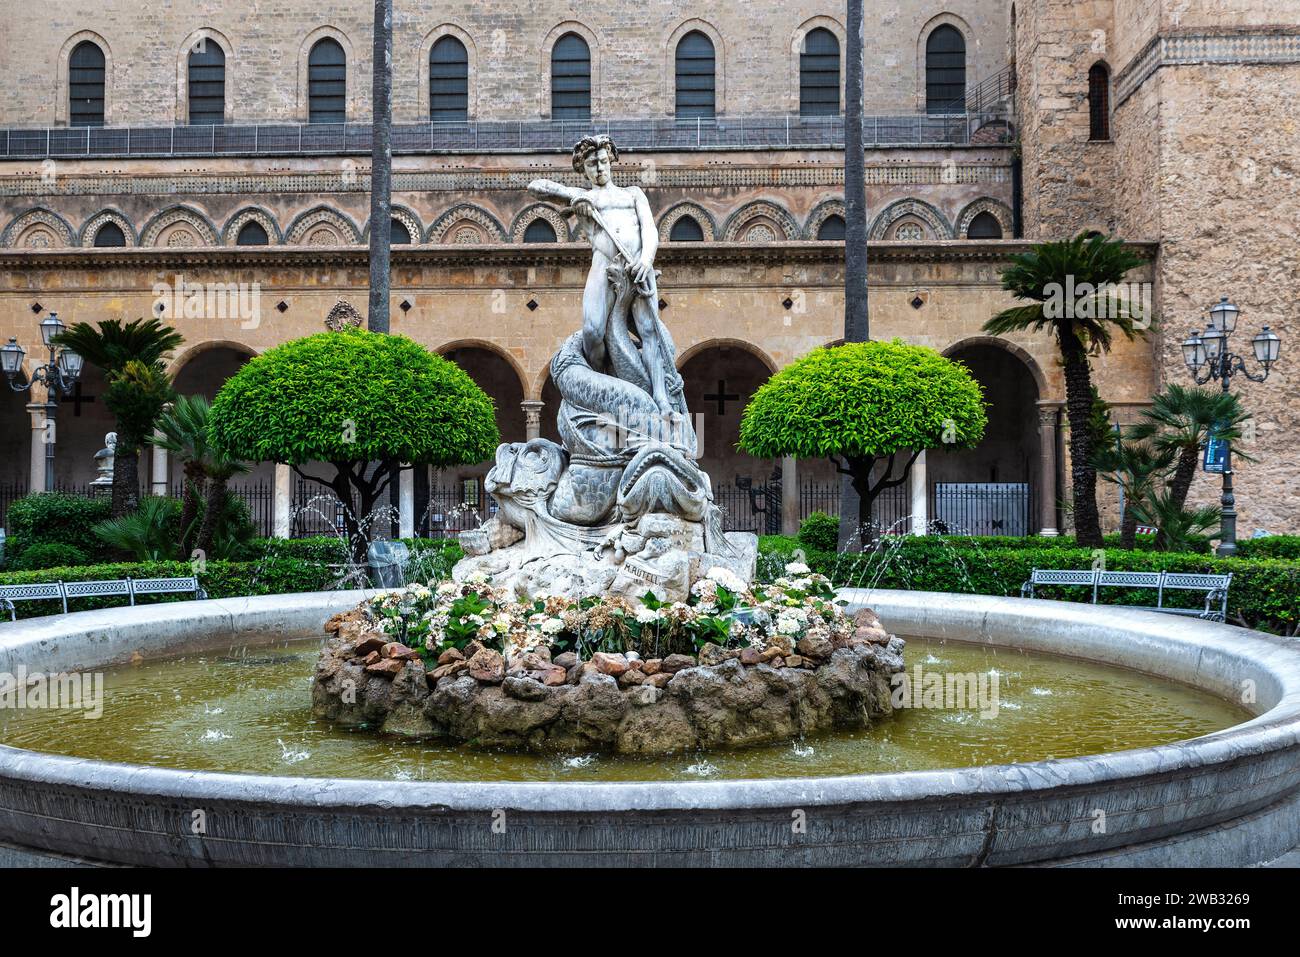 Triton Fountain or Fontana del Tritone next to the cathedral in the old town of Monreale, Palermo, Sicily, Italy Stock Photo